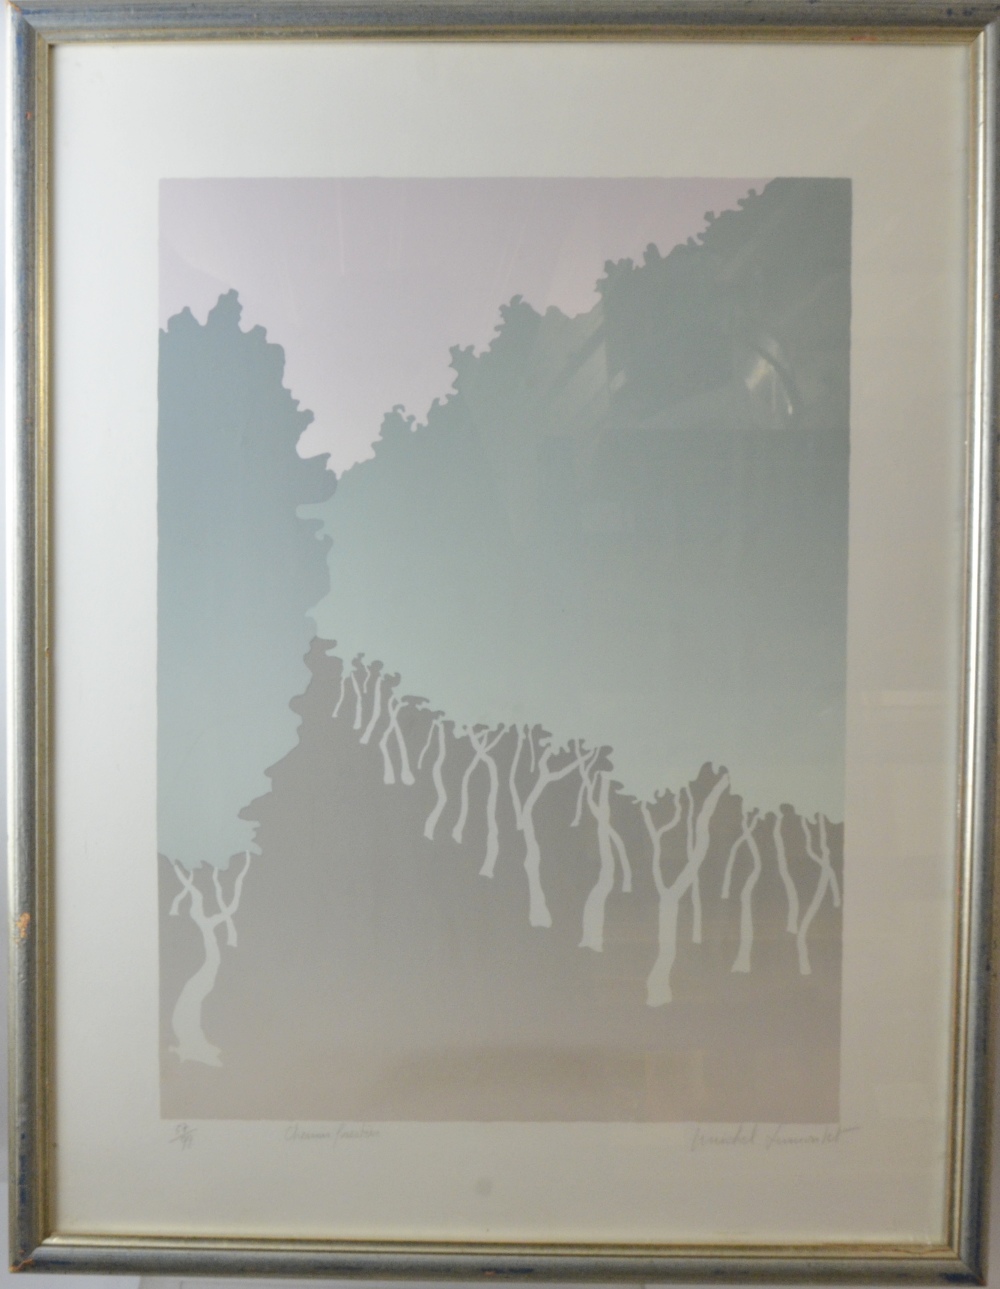 Michel Dumontet, 'Chemin Forestier', signed, limited edition print 57/99, 64.5cm x 49cm, - Image 4 of 6